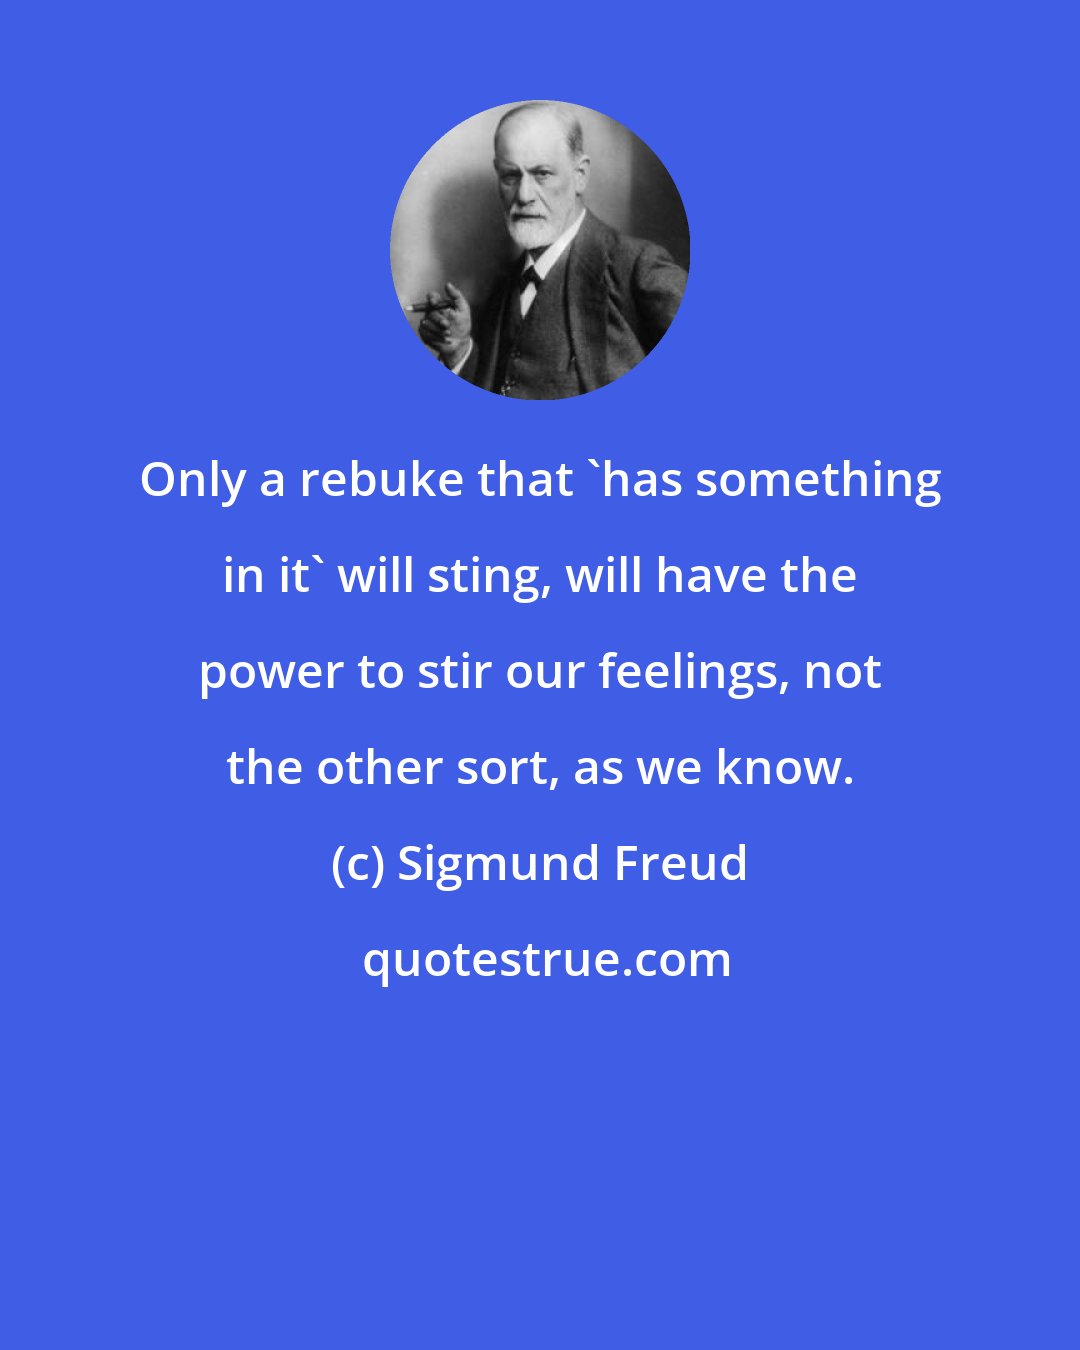 Sigmund Freud: Only a rebuke that 'has something in it' will sting, will have the power to stir our feelings, not the other sort, as we know.